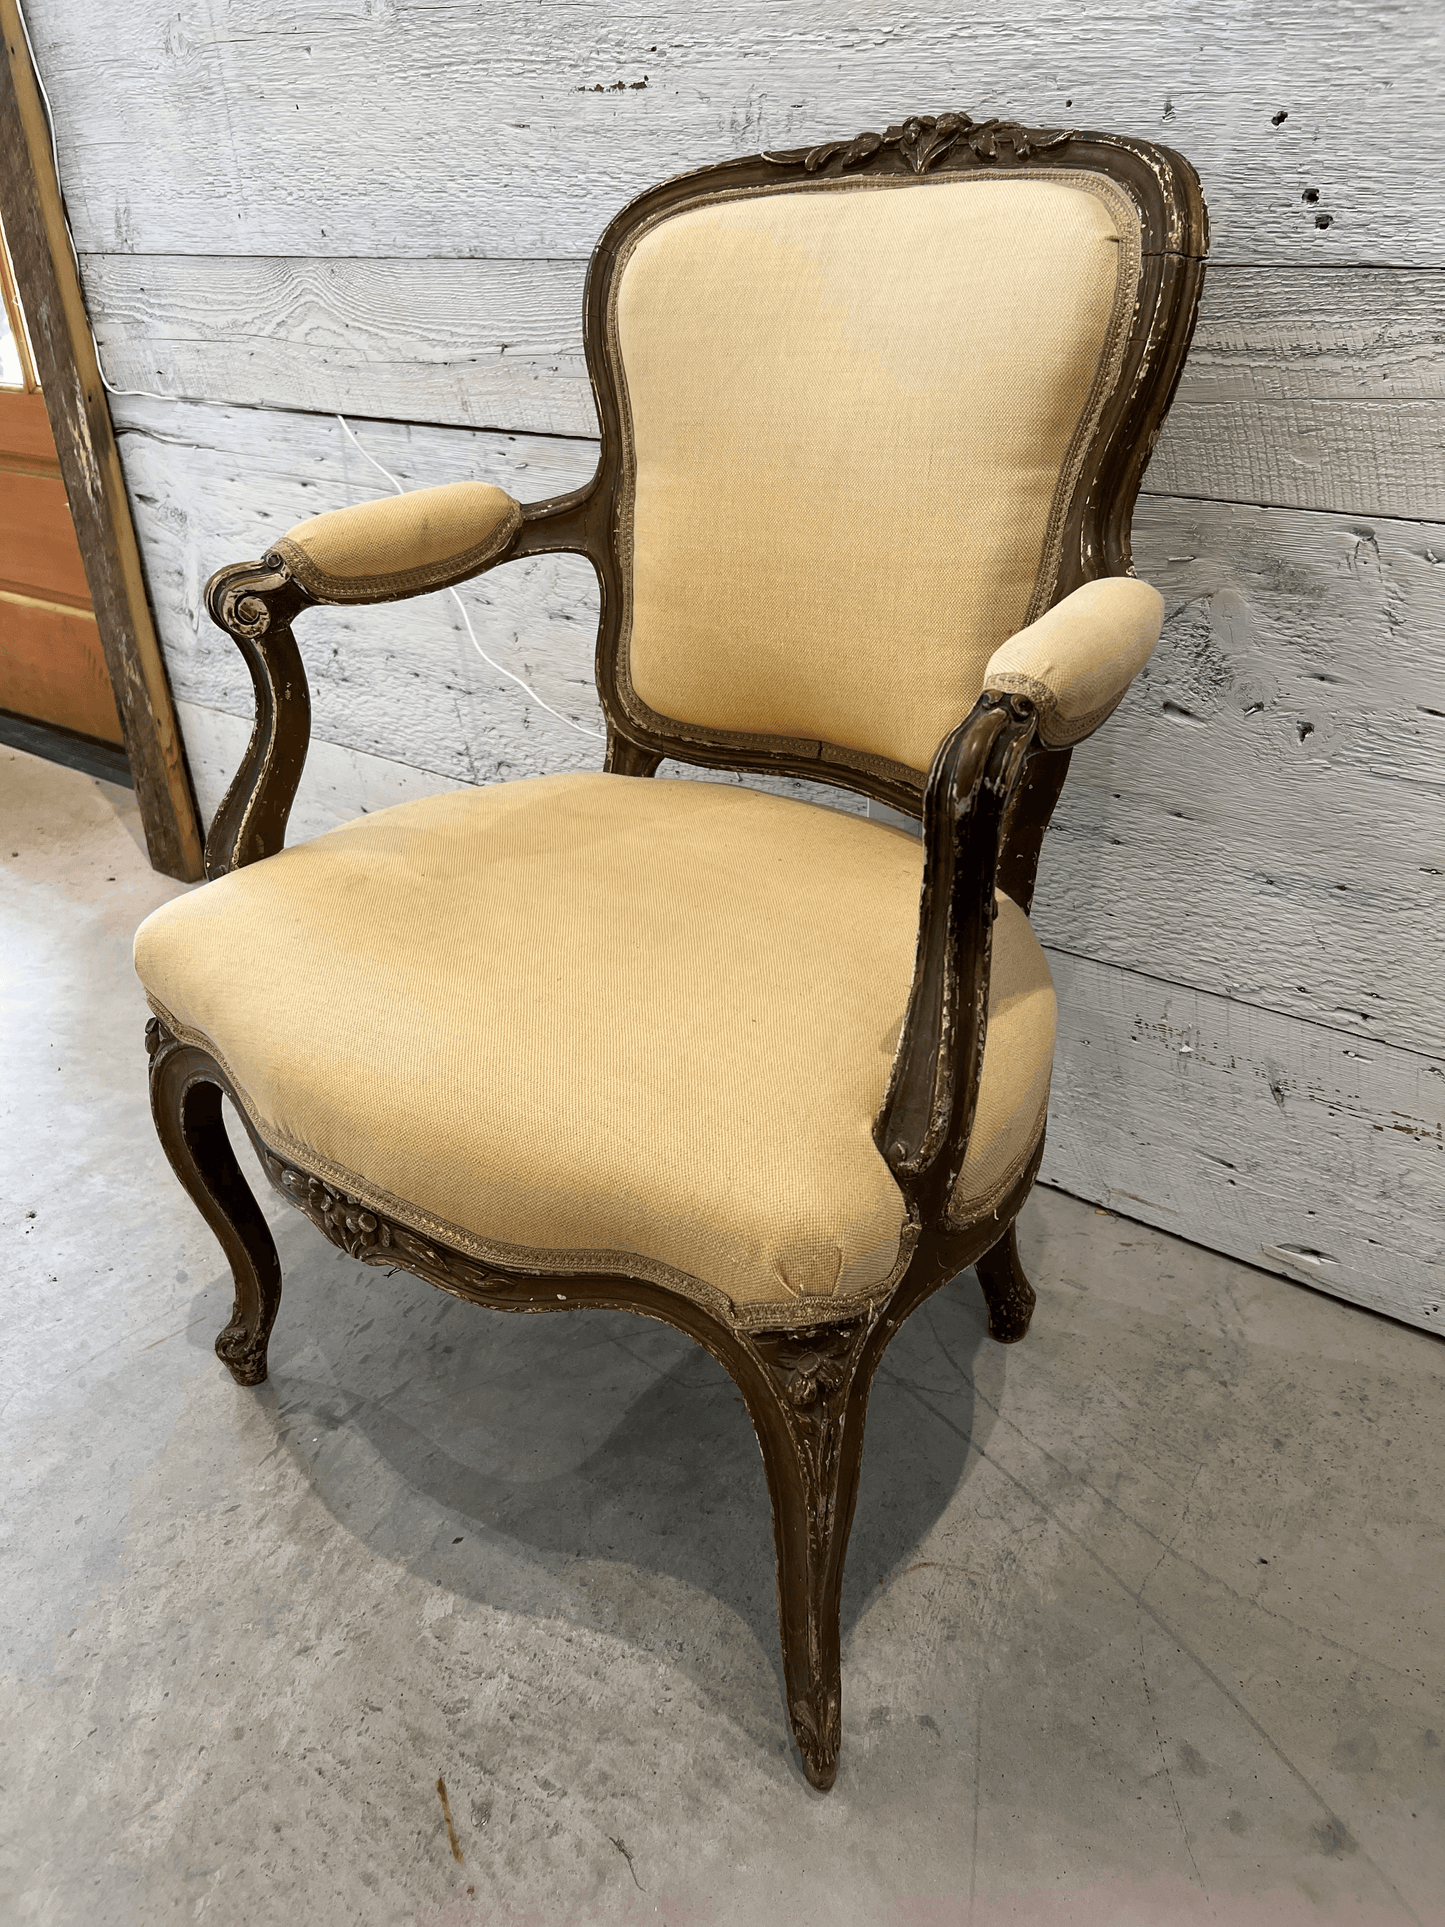 Early 20th Century Louis XV Walnut Fauteuil Arm Chairs - a Pair - The White Barn Antiques